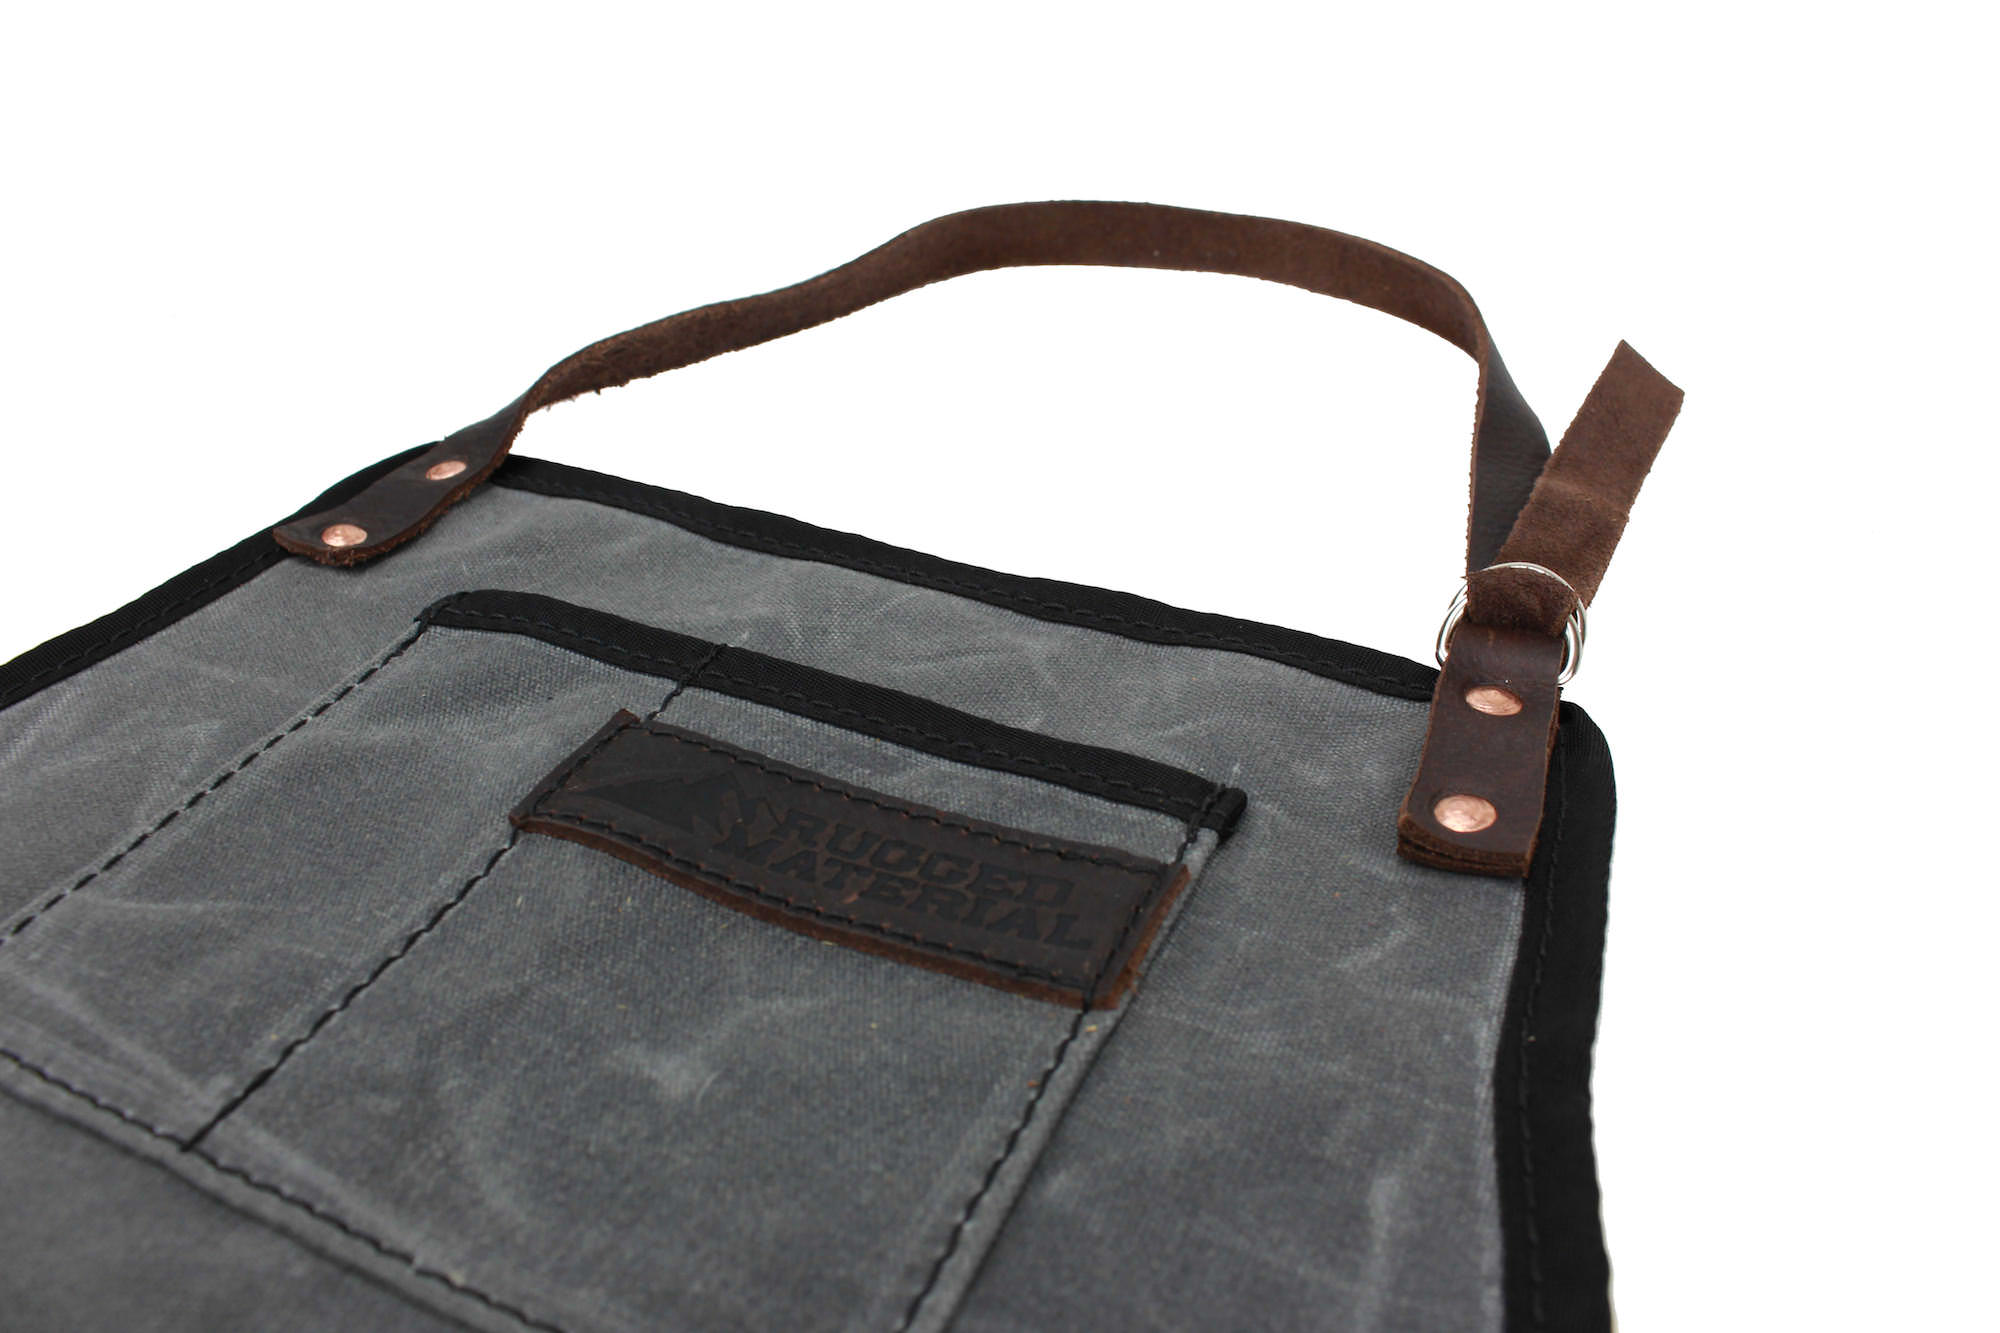 Gentleman's Apron by Rugged Material